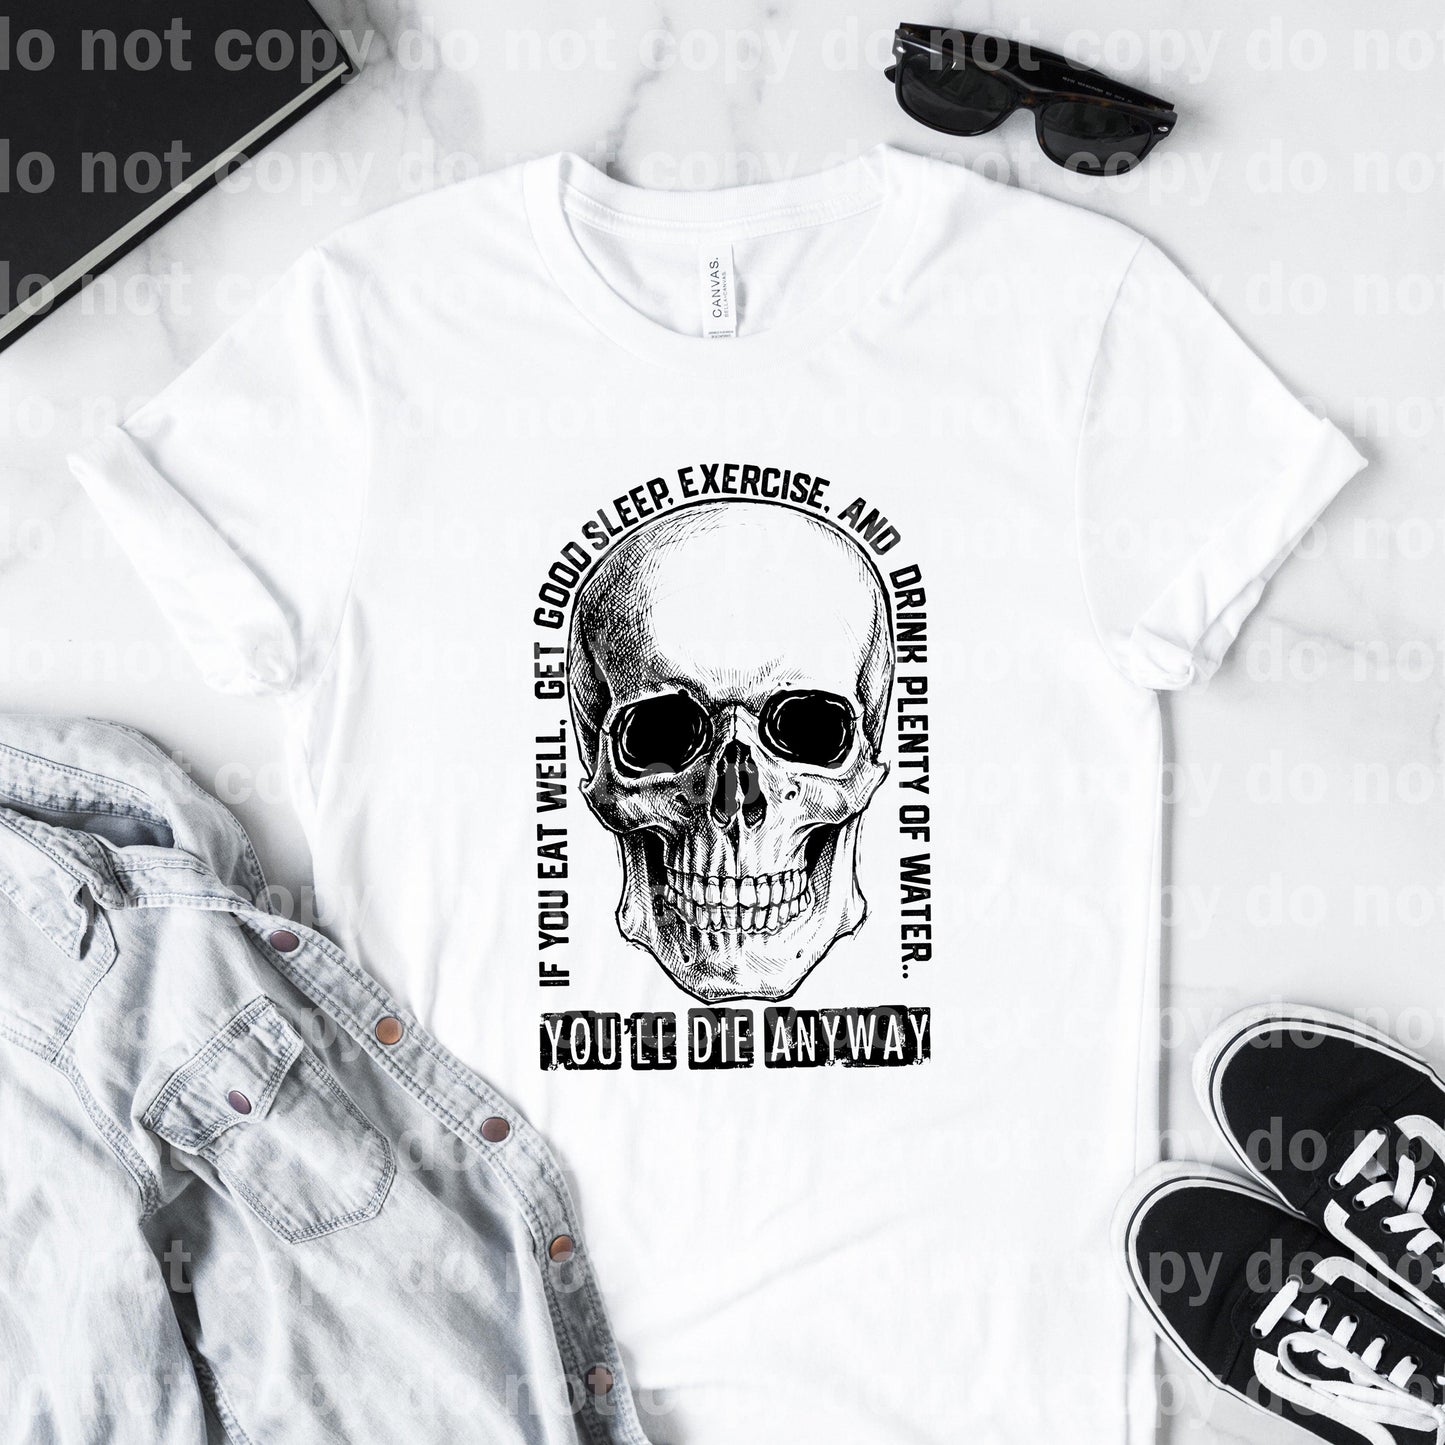 If You Eat Well Get Good Sleep Exercise And Drink Plenty Of Water You'll Die Anyway Skull Sublimation Print